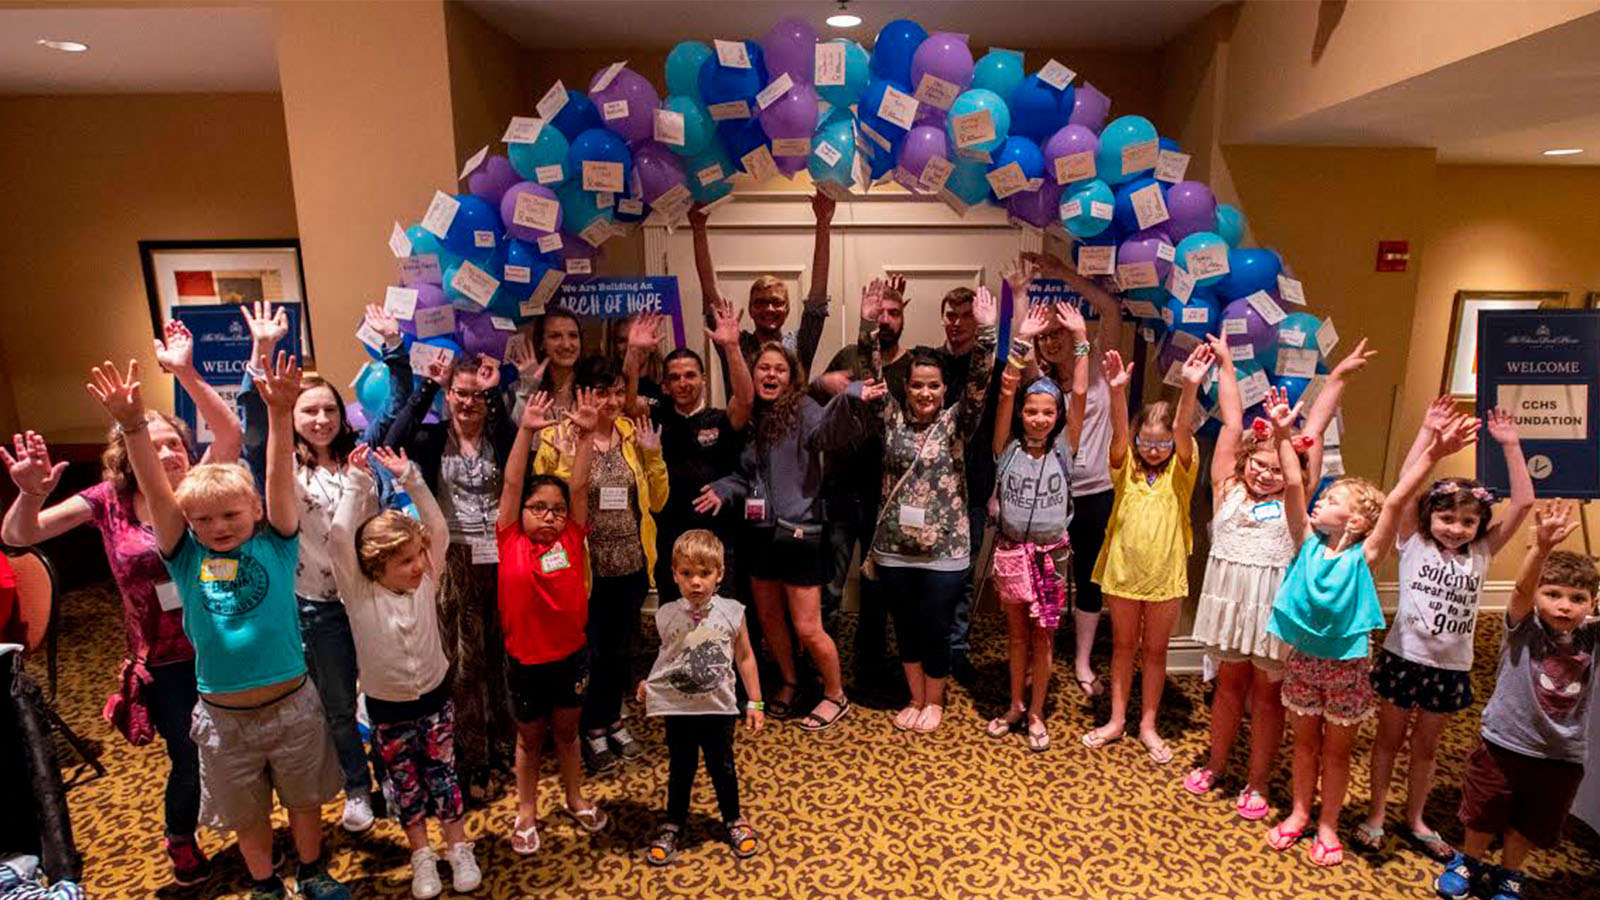 A group of children with CCHS celebrate under an archway of balloons